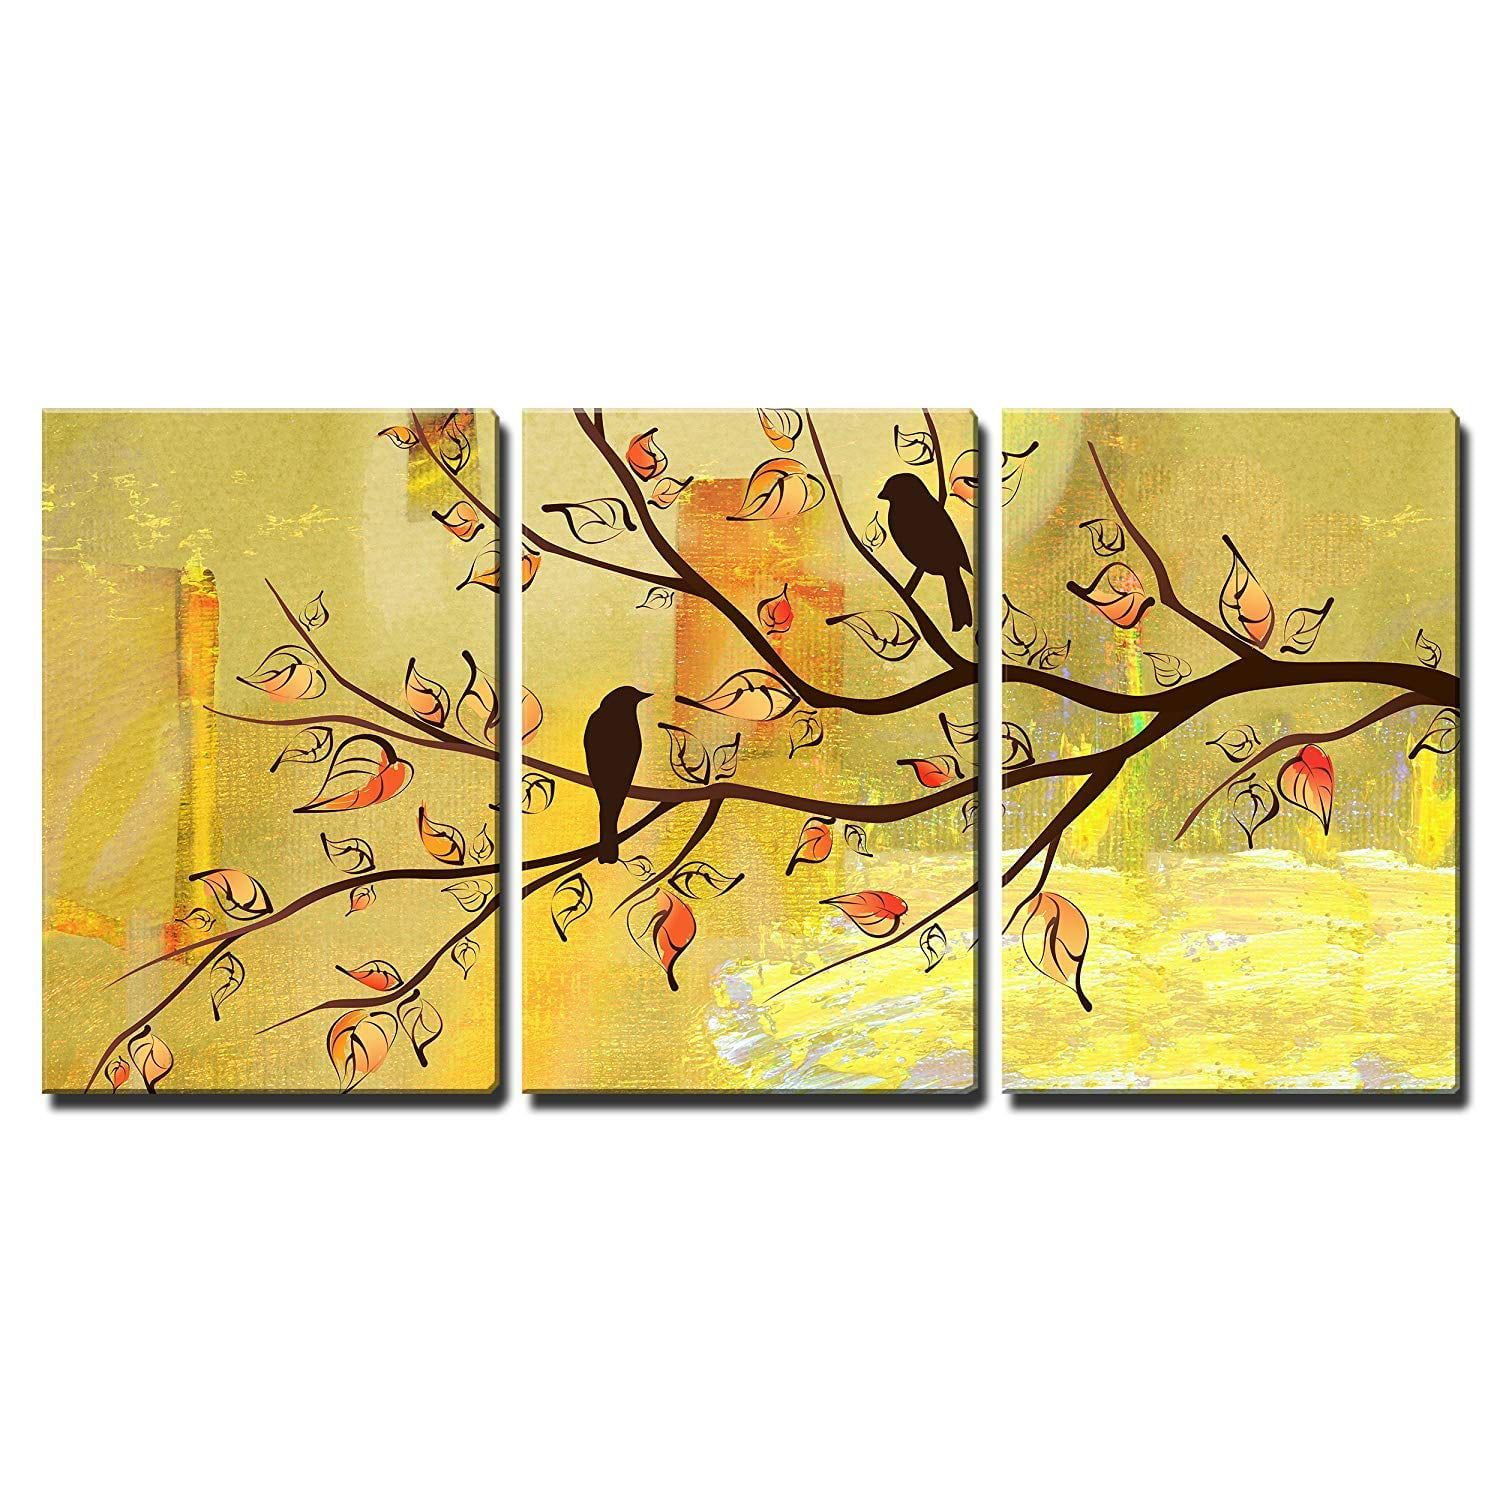 Wall26 3 Piece Canvas Wall Art – Two Birds On Tree Branches On Vintage  Yellow Background – Modern Home Decor Stretched And Framed Ready To Hang –  24"x36"x3 Panels – Walmart With Regard To Most Current Bird On Tree Branch Wall Art (View 20 of 20)